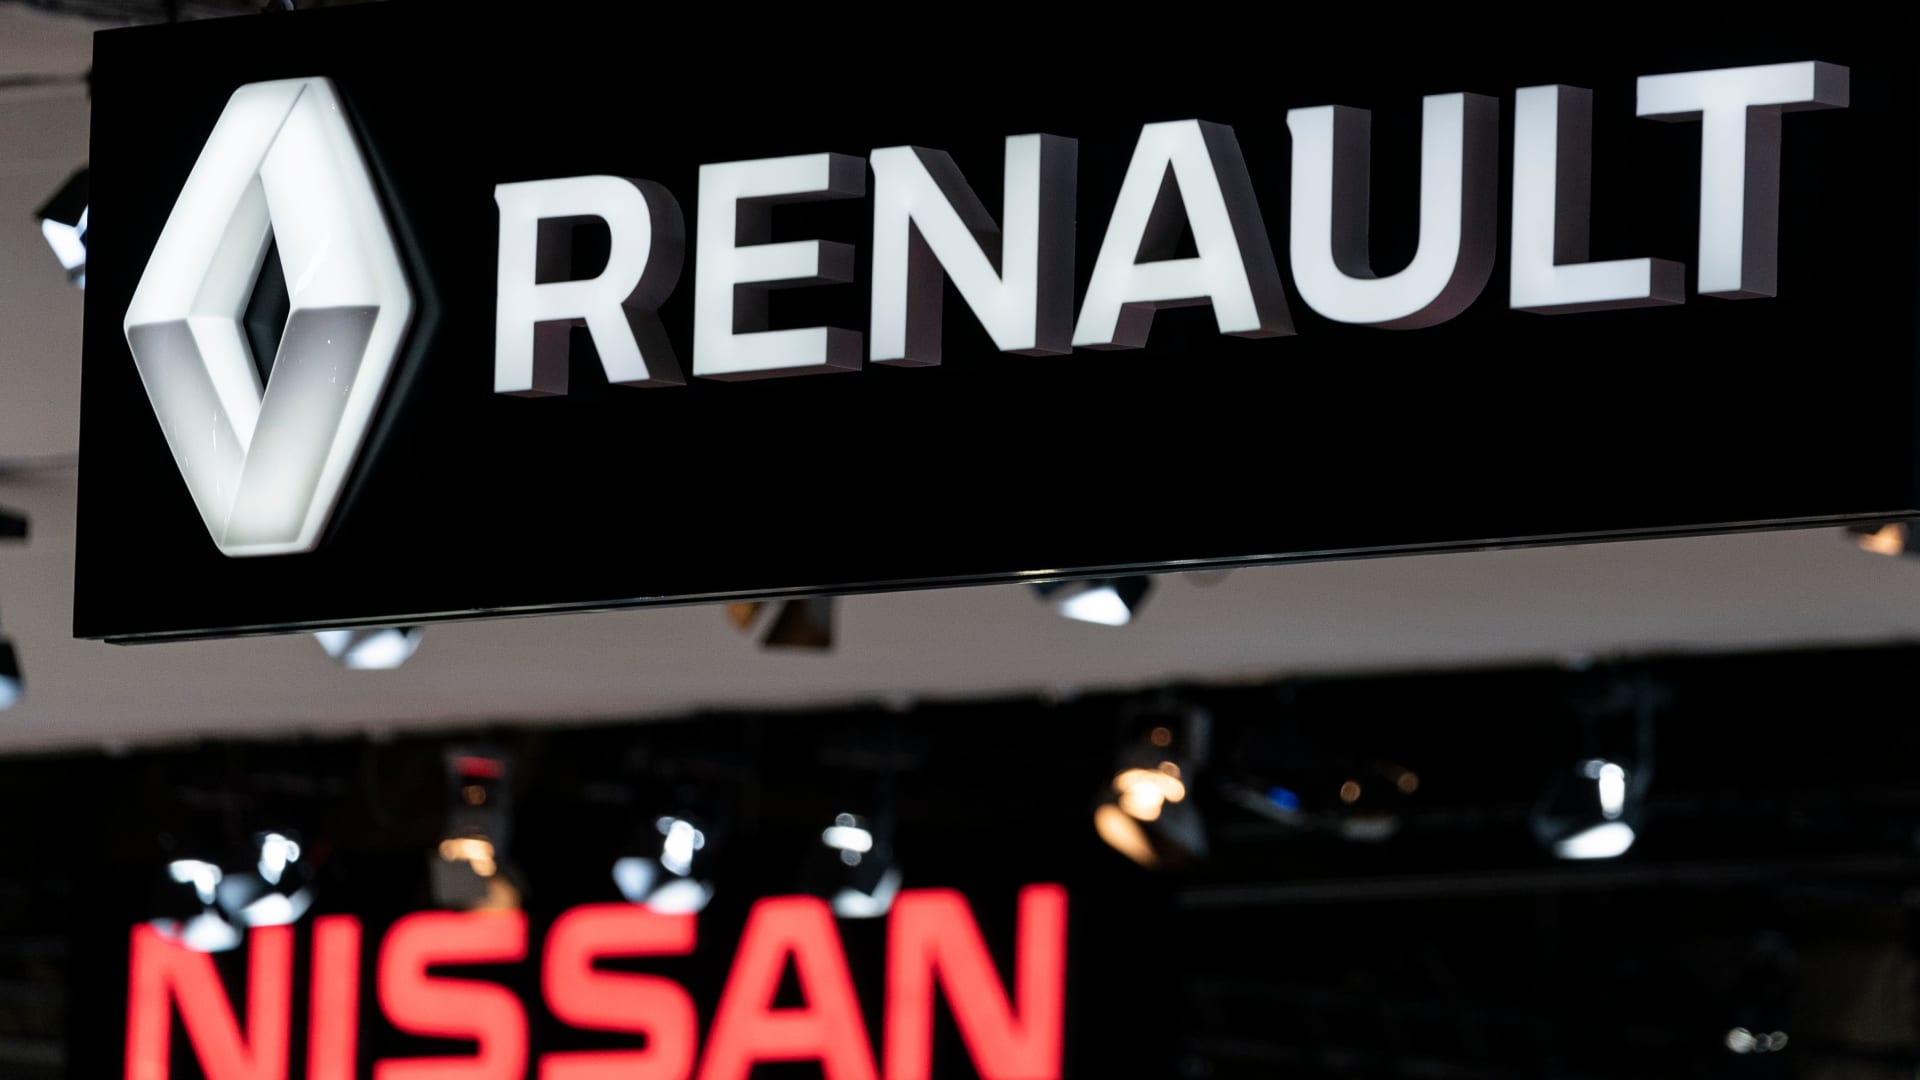 Renault and Nissan automobile logos are pictured during the Brussels Motor Show on January 9, 2020 in Brussels. (Photo by KENZO TRIBOUILLARD/AFP via Getty Images)